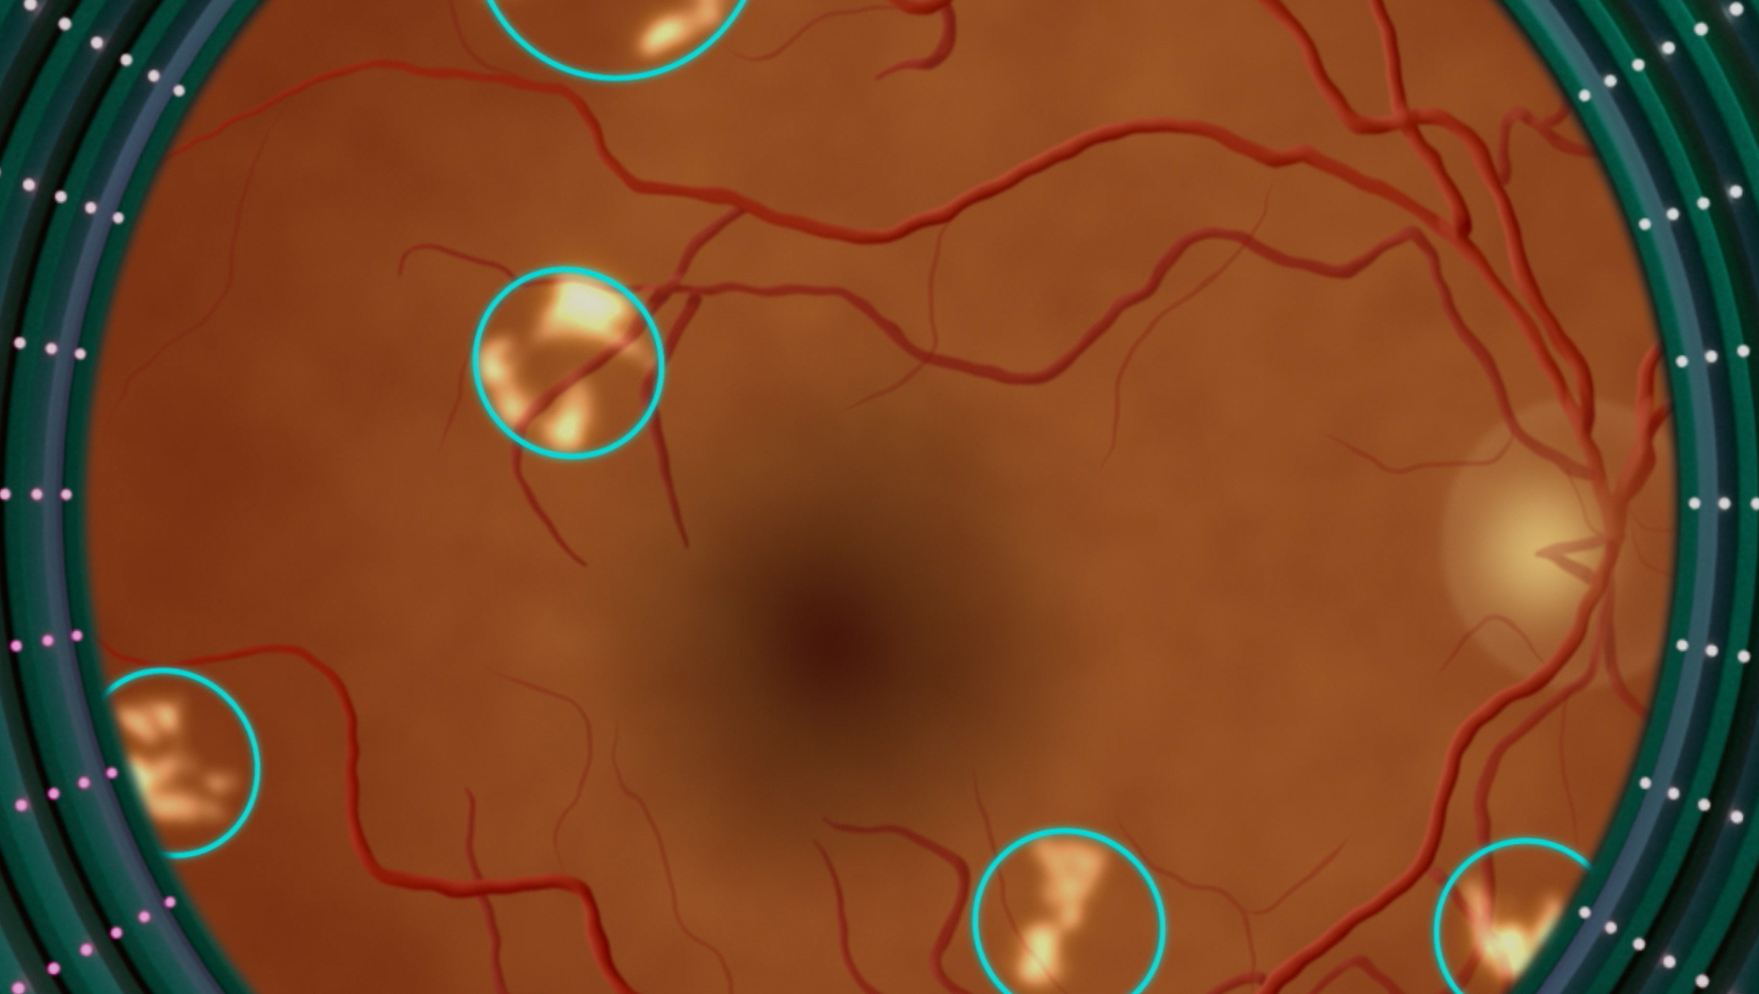 A close-up image of a retina with white spots circled.